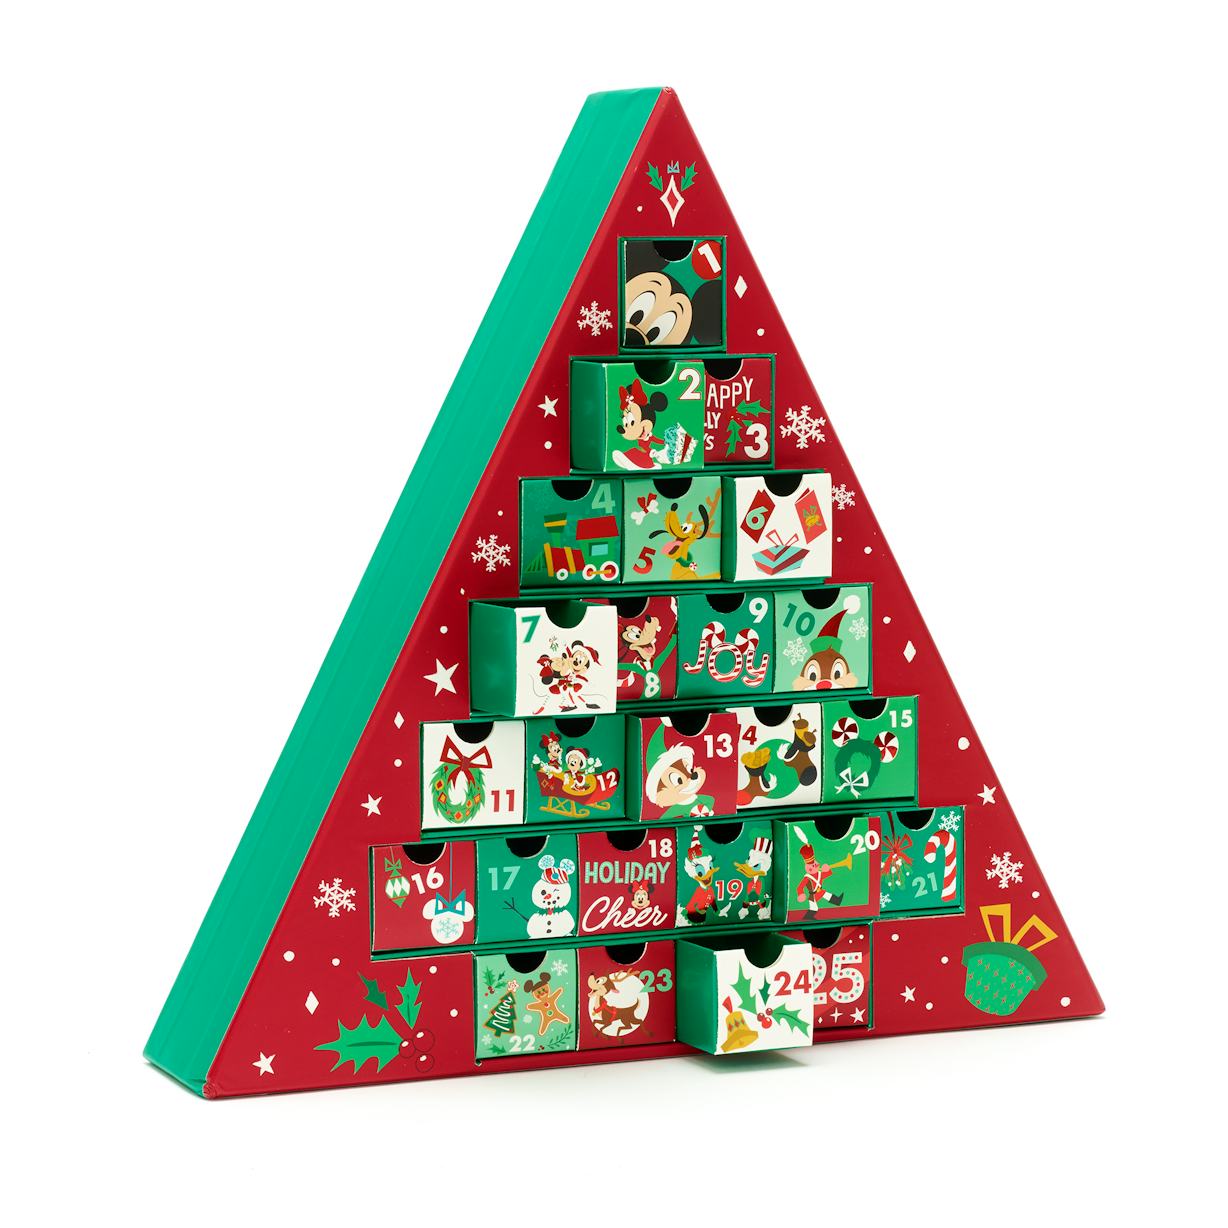 Disney Has Launched Advent Calendars And Our Childhood Dreams Have Come